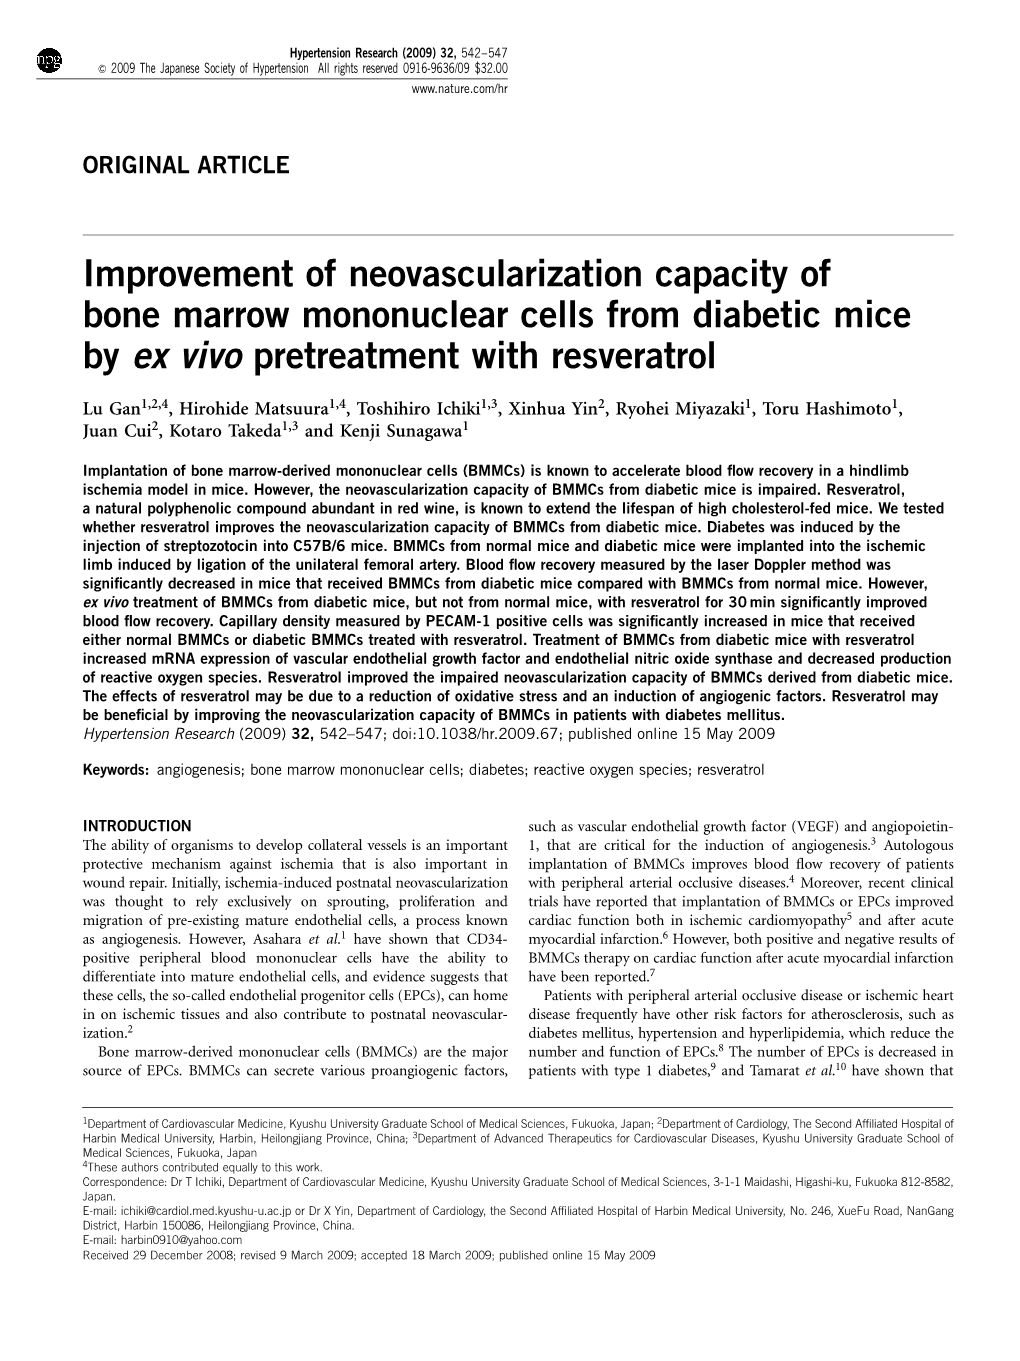 Improvement of Neovascularization Capacity of Bone Marrow Mononuclear Cells from Diabetic Mice by Ex Vivo Pretreatment with Resveratrol